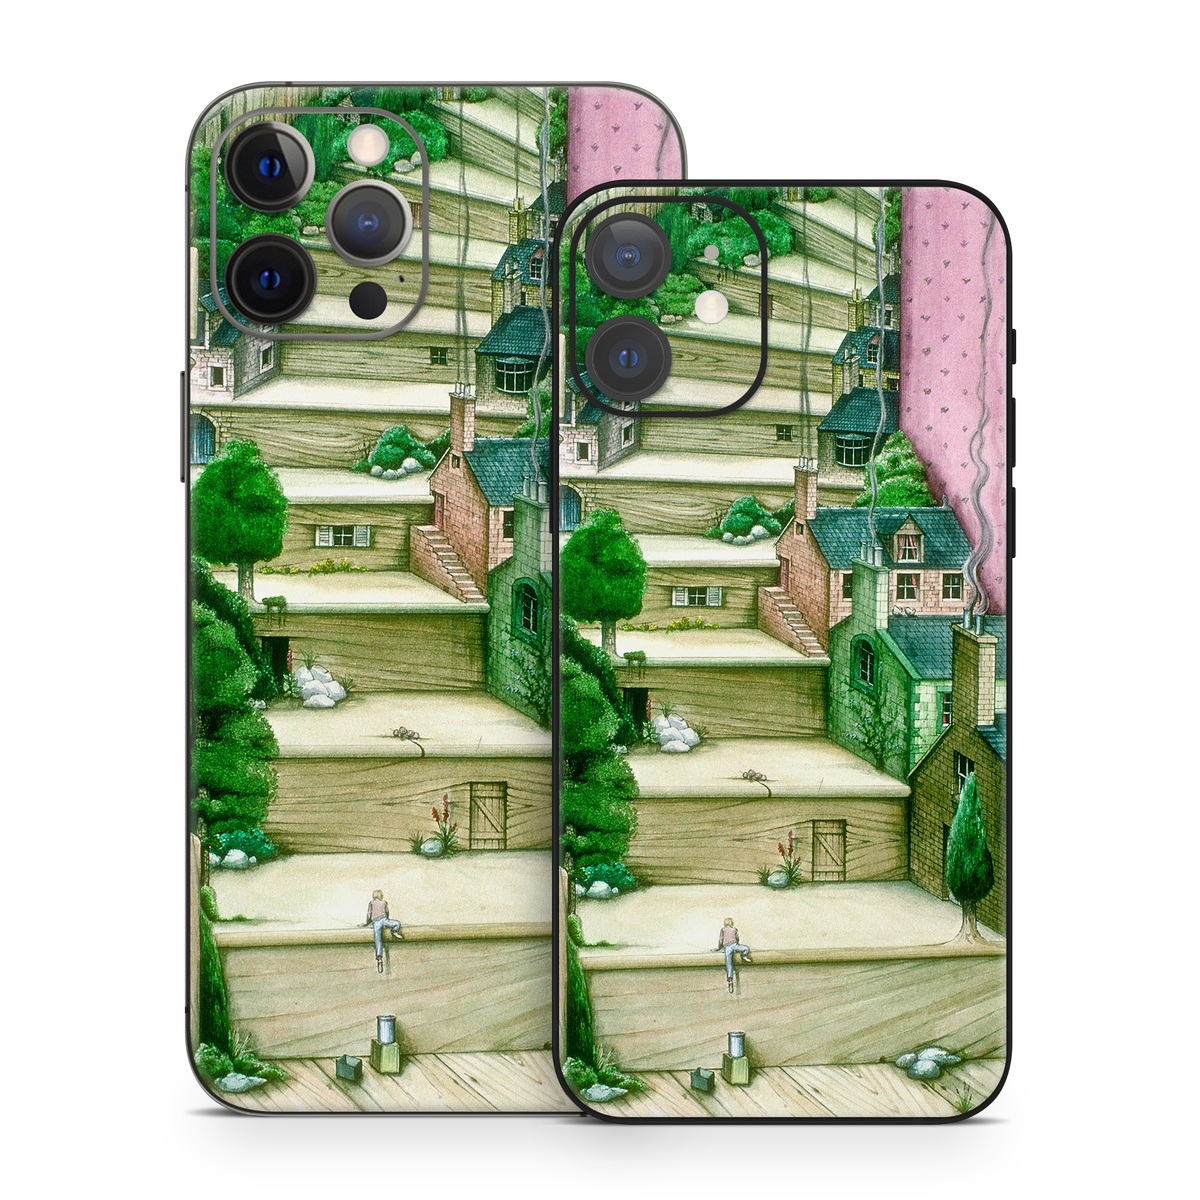 iPhone 12 Series Skin design of Green, Stairs, House, Watercolor paint, Home, Illustration, Building, Wood, Plant, Sketch, with pink, green, brown colors